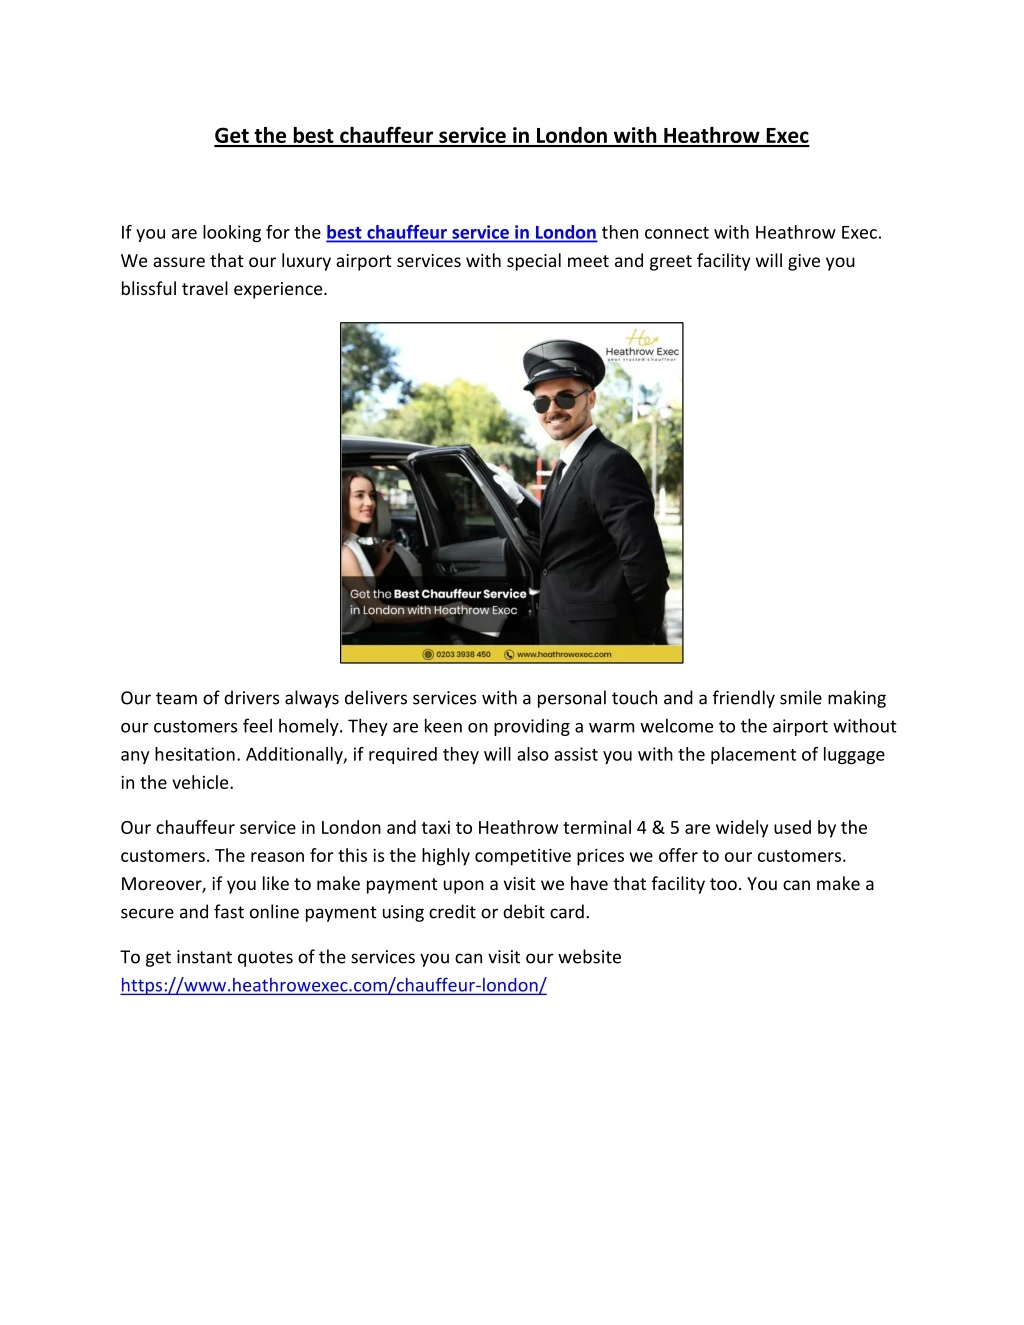 get the best chauffeur service in london with